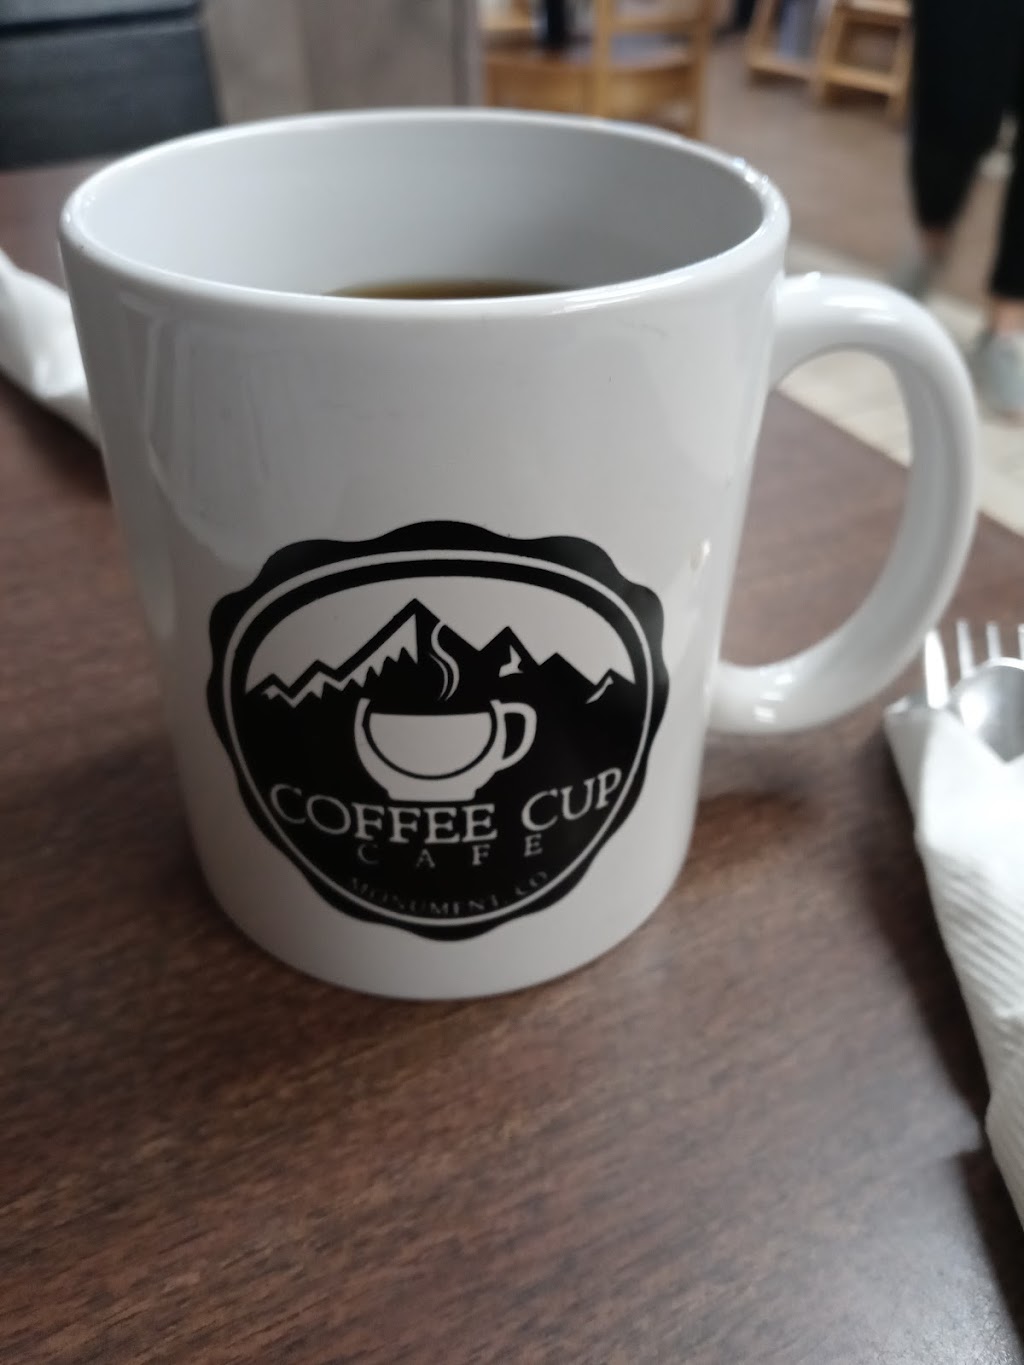 Coffee Cup Cafe | 251 Front St #6, Monument, CO 80132, USA | Phone: (719) 488-0663